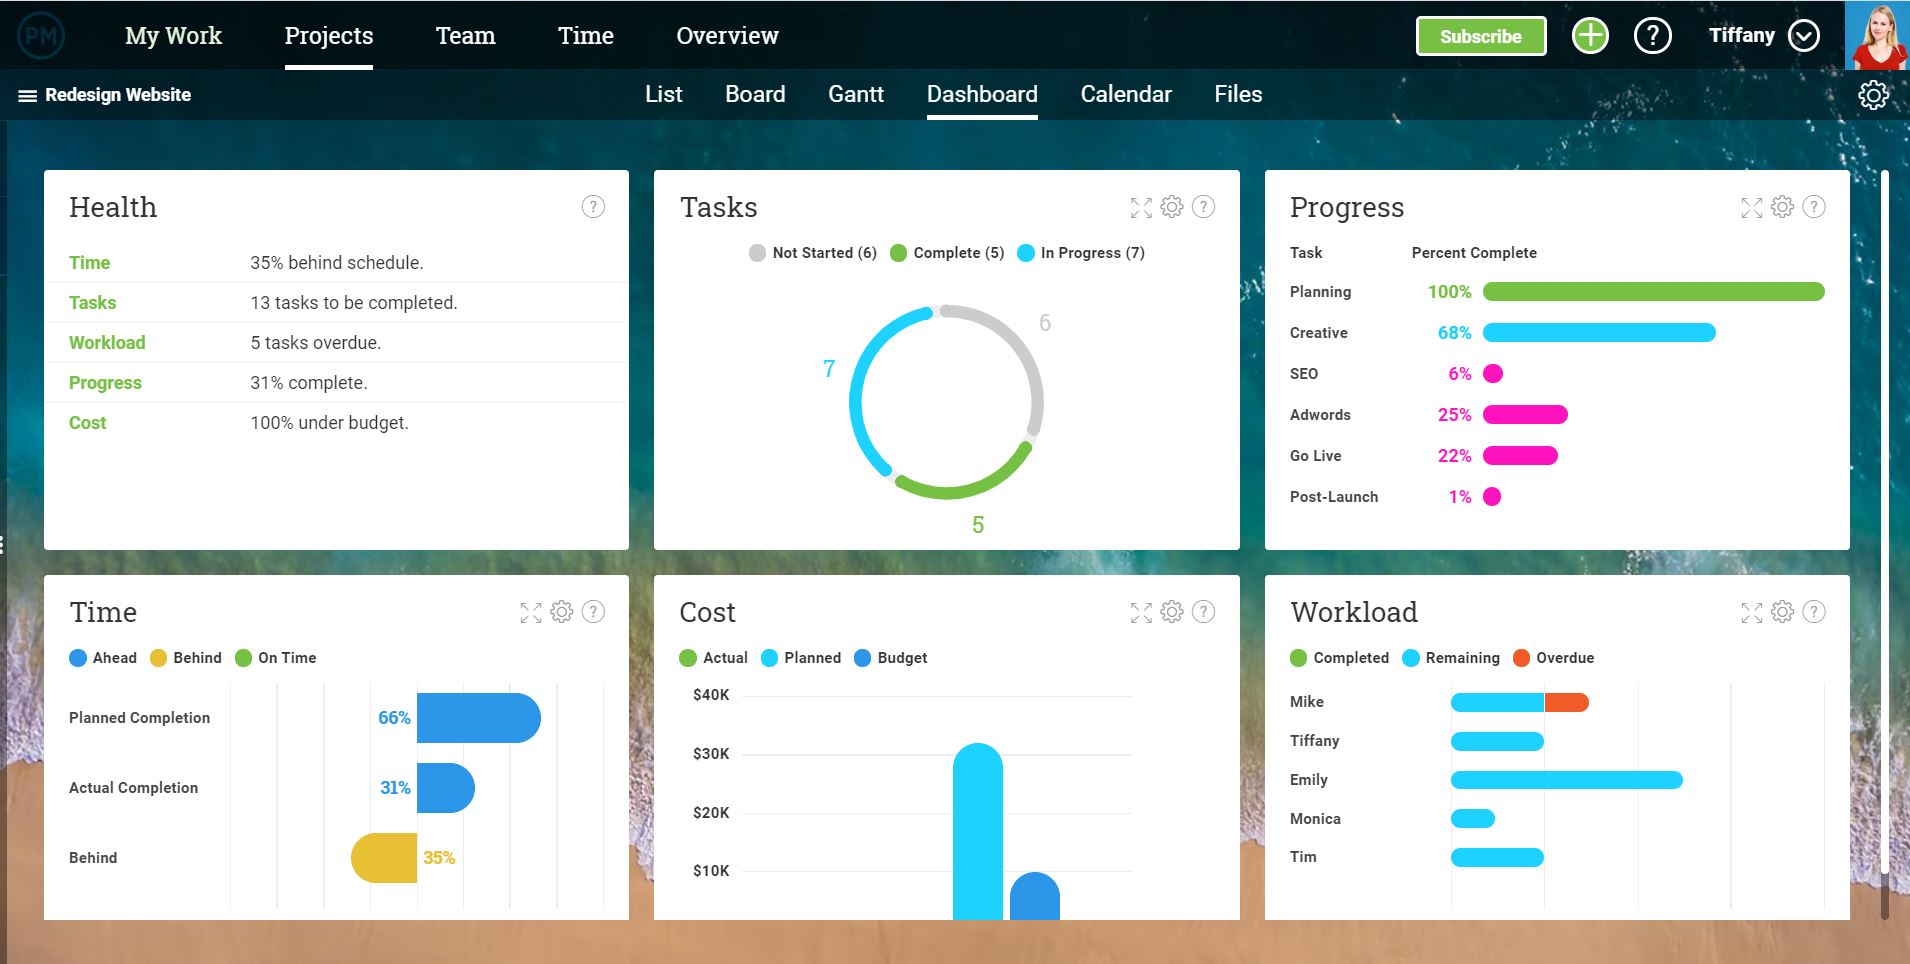 A screenshot of ProjectManager.com's real-time dashboard